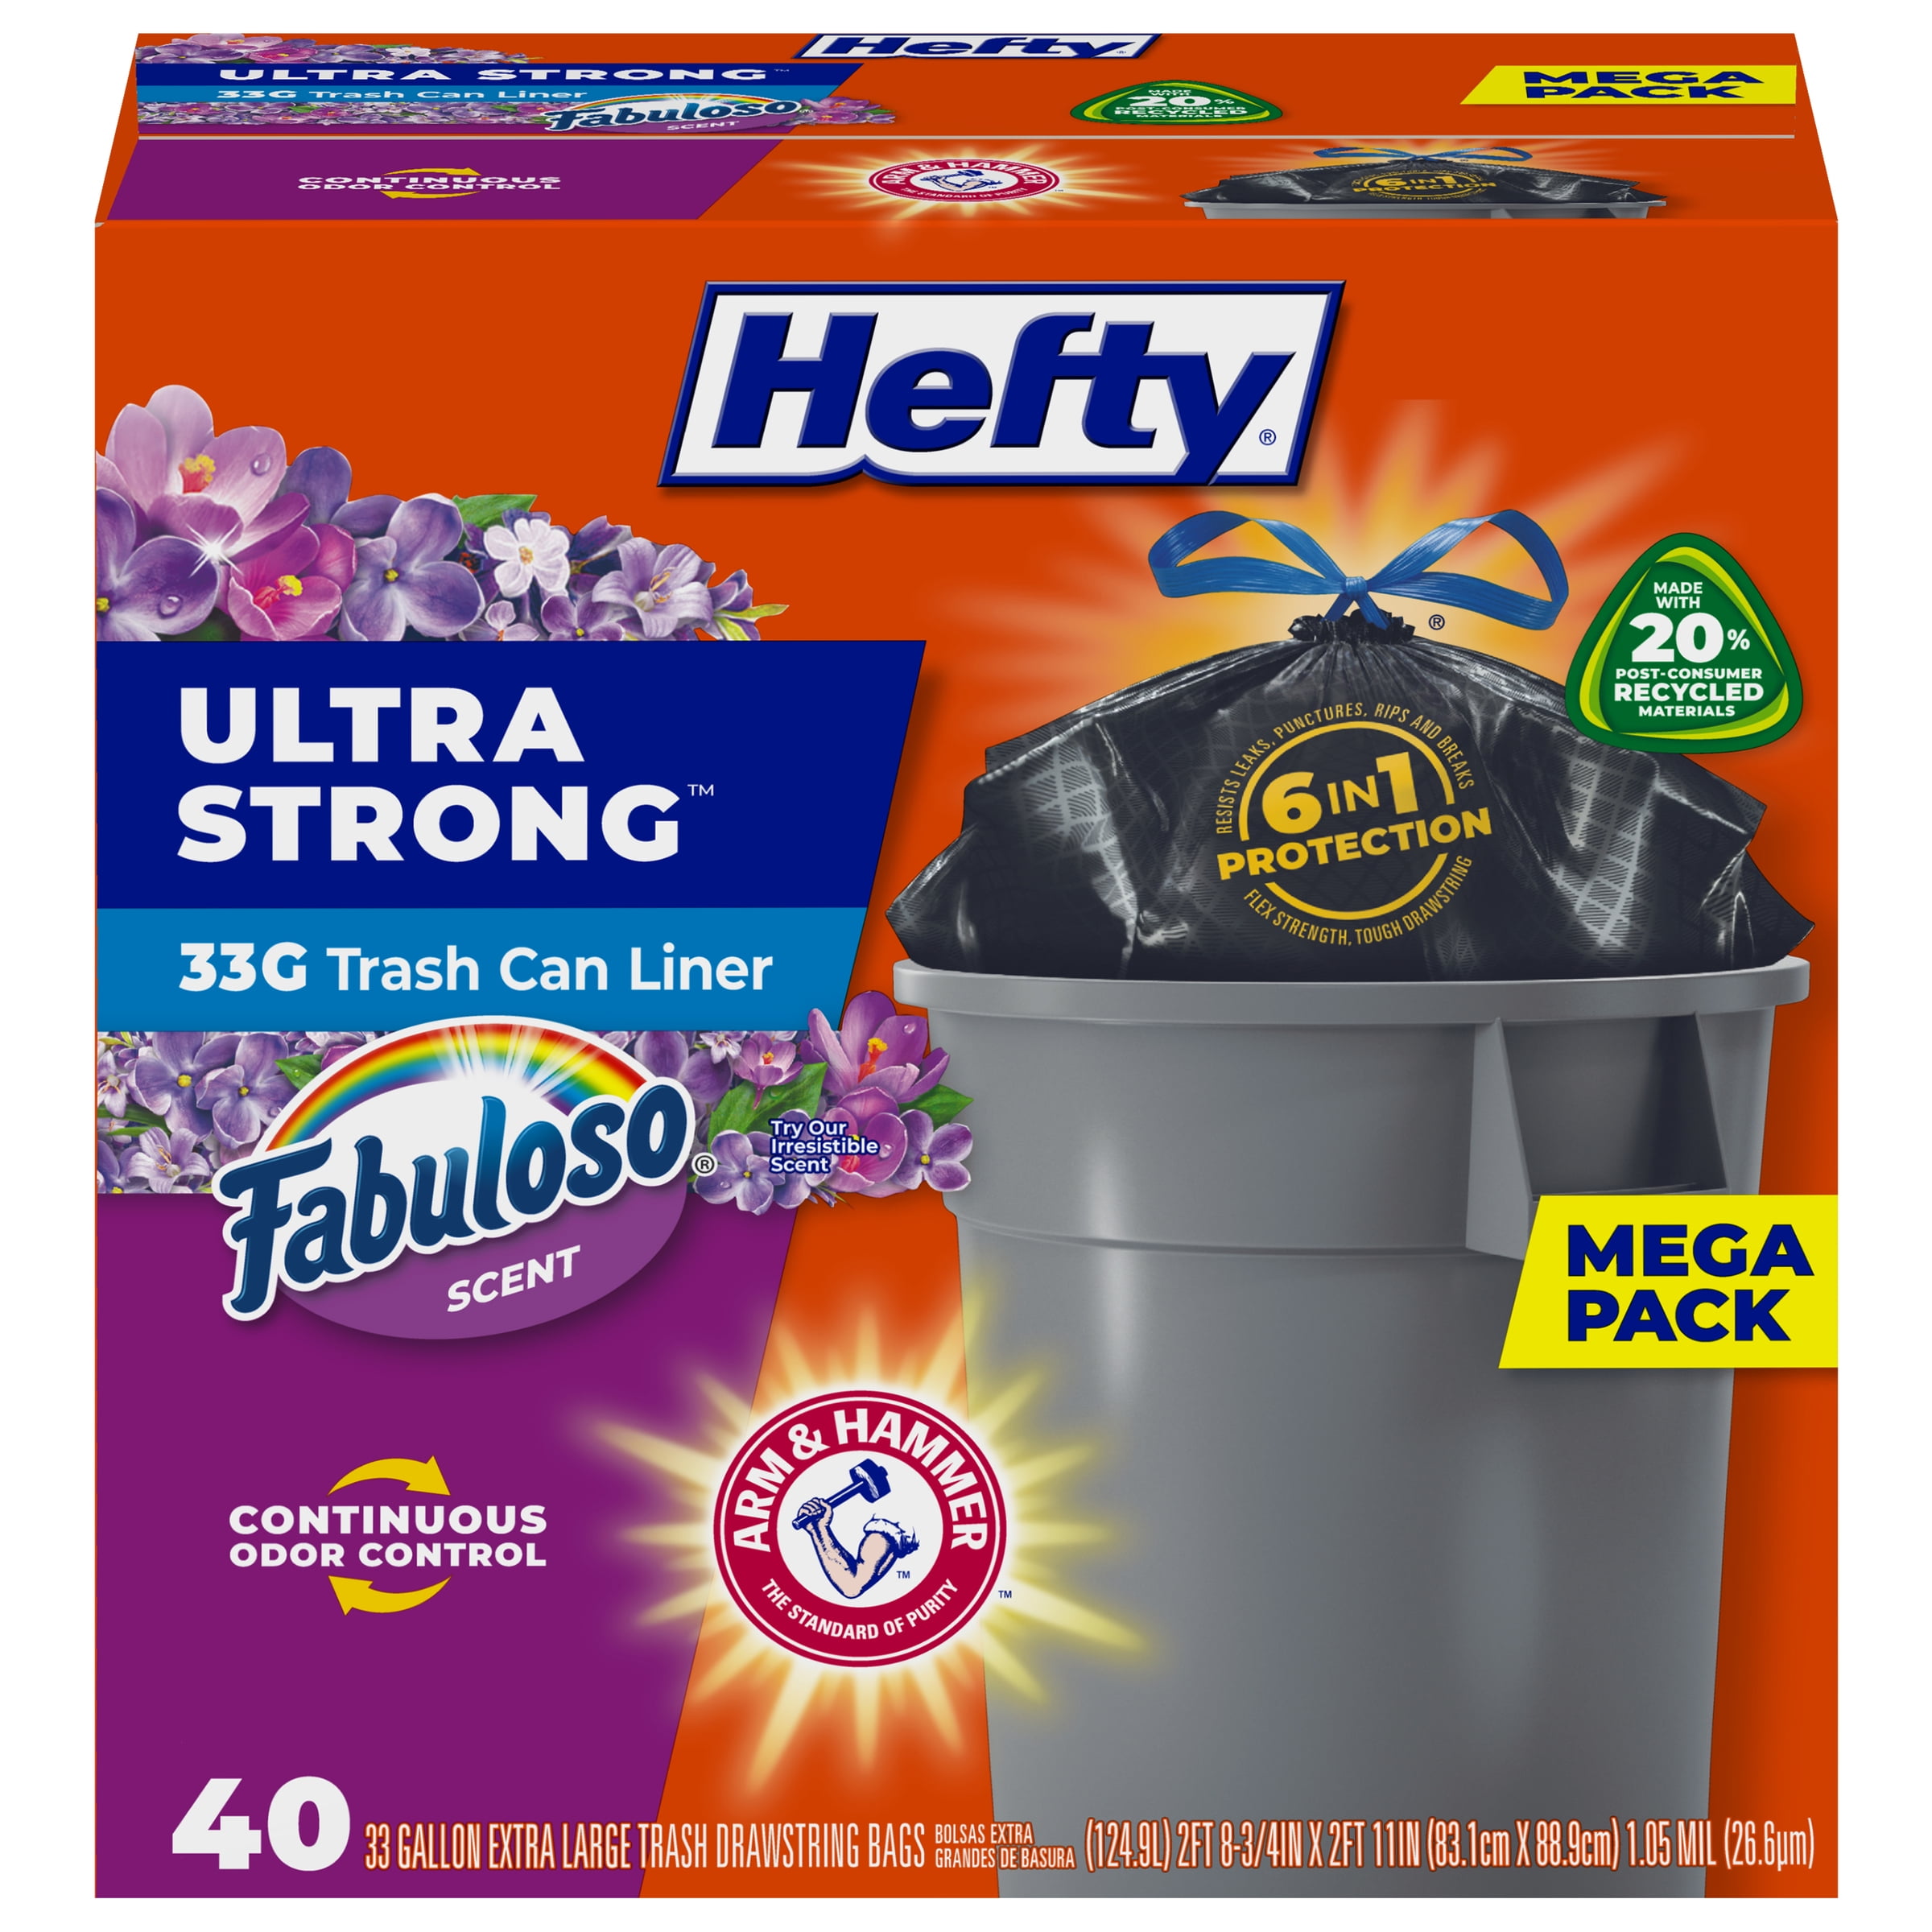 33 Gallon Trash Bags (100 Bags w/Ties Value Pack), Large Black Garbage Bags  30 Gallon - 32 Gallon - 35 Gallon.